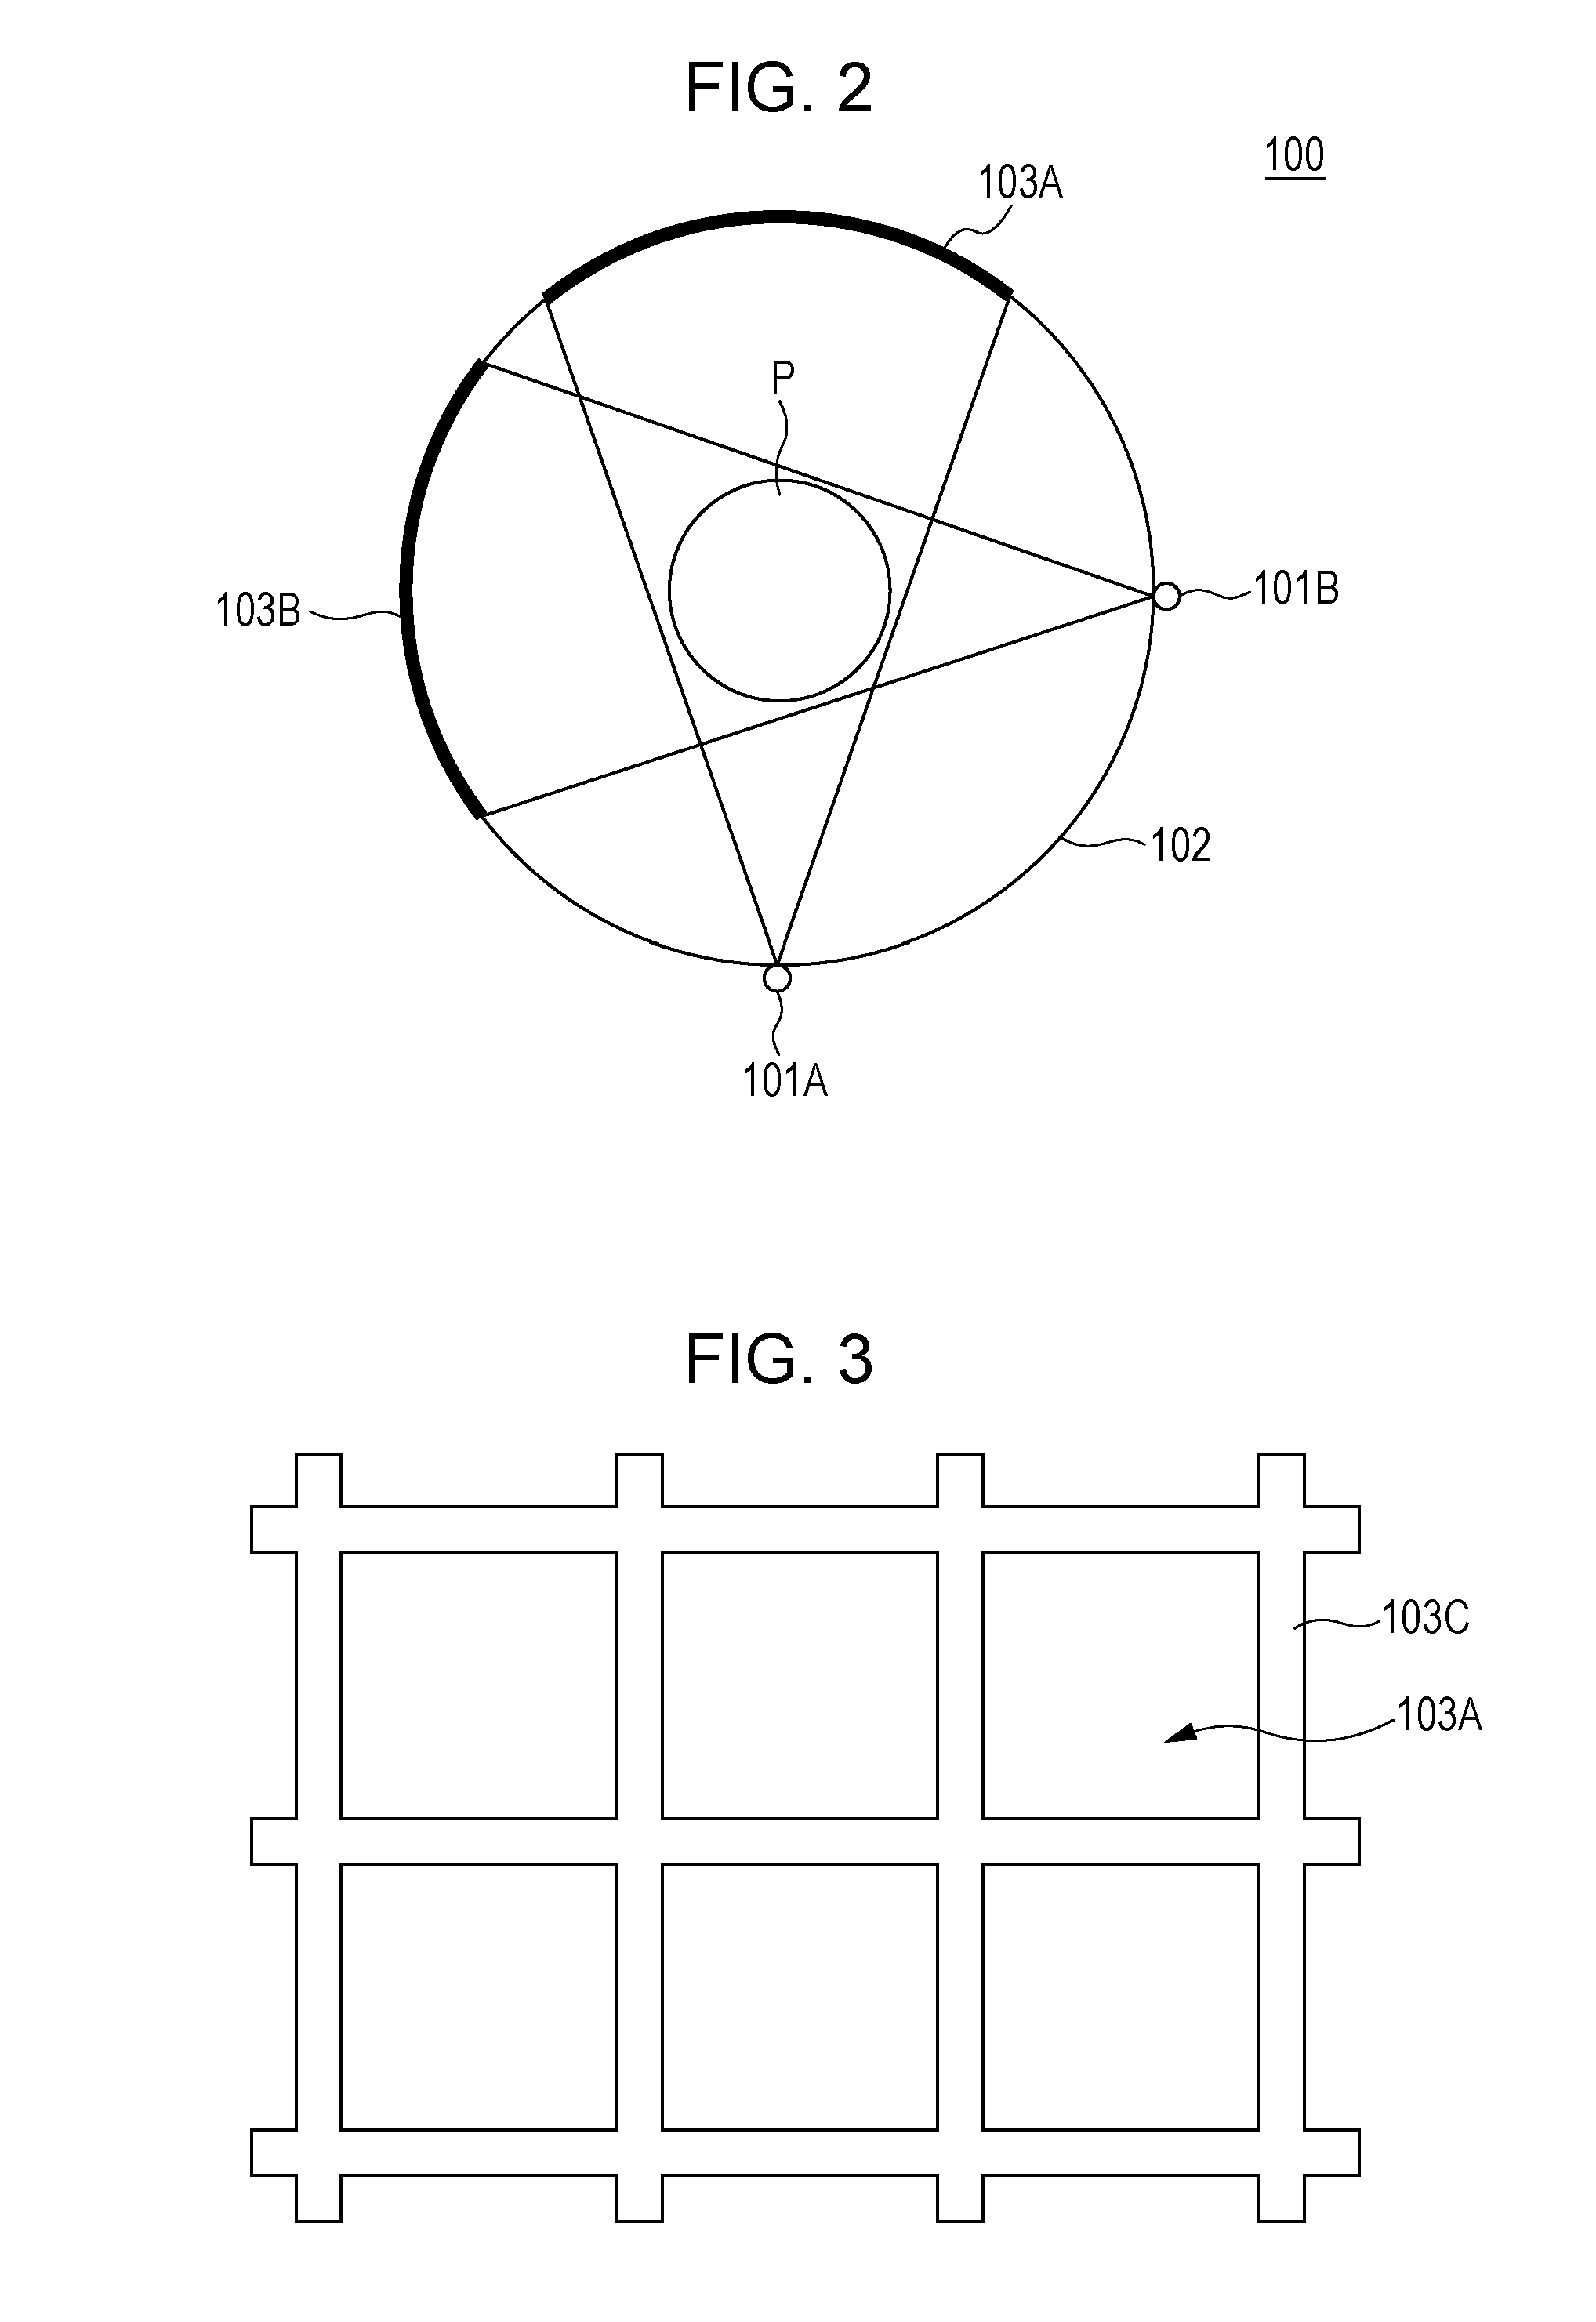 Image domain pansharpening method and system for spectral CT with large pixel energy discriminating detectors